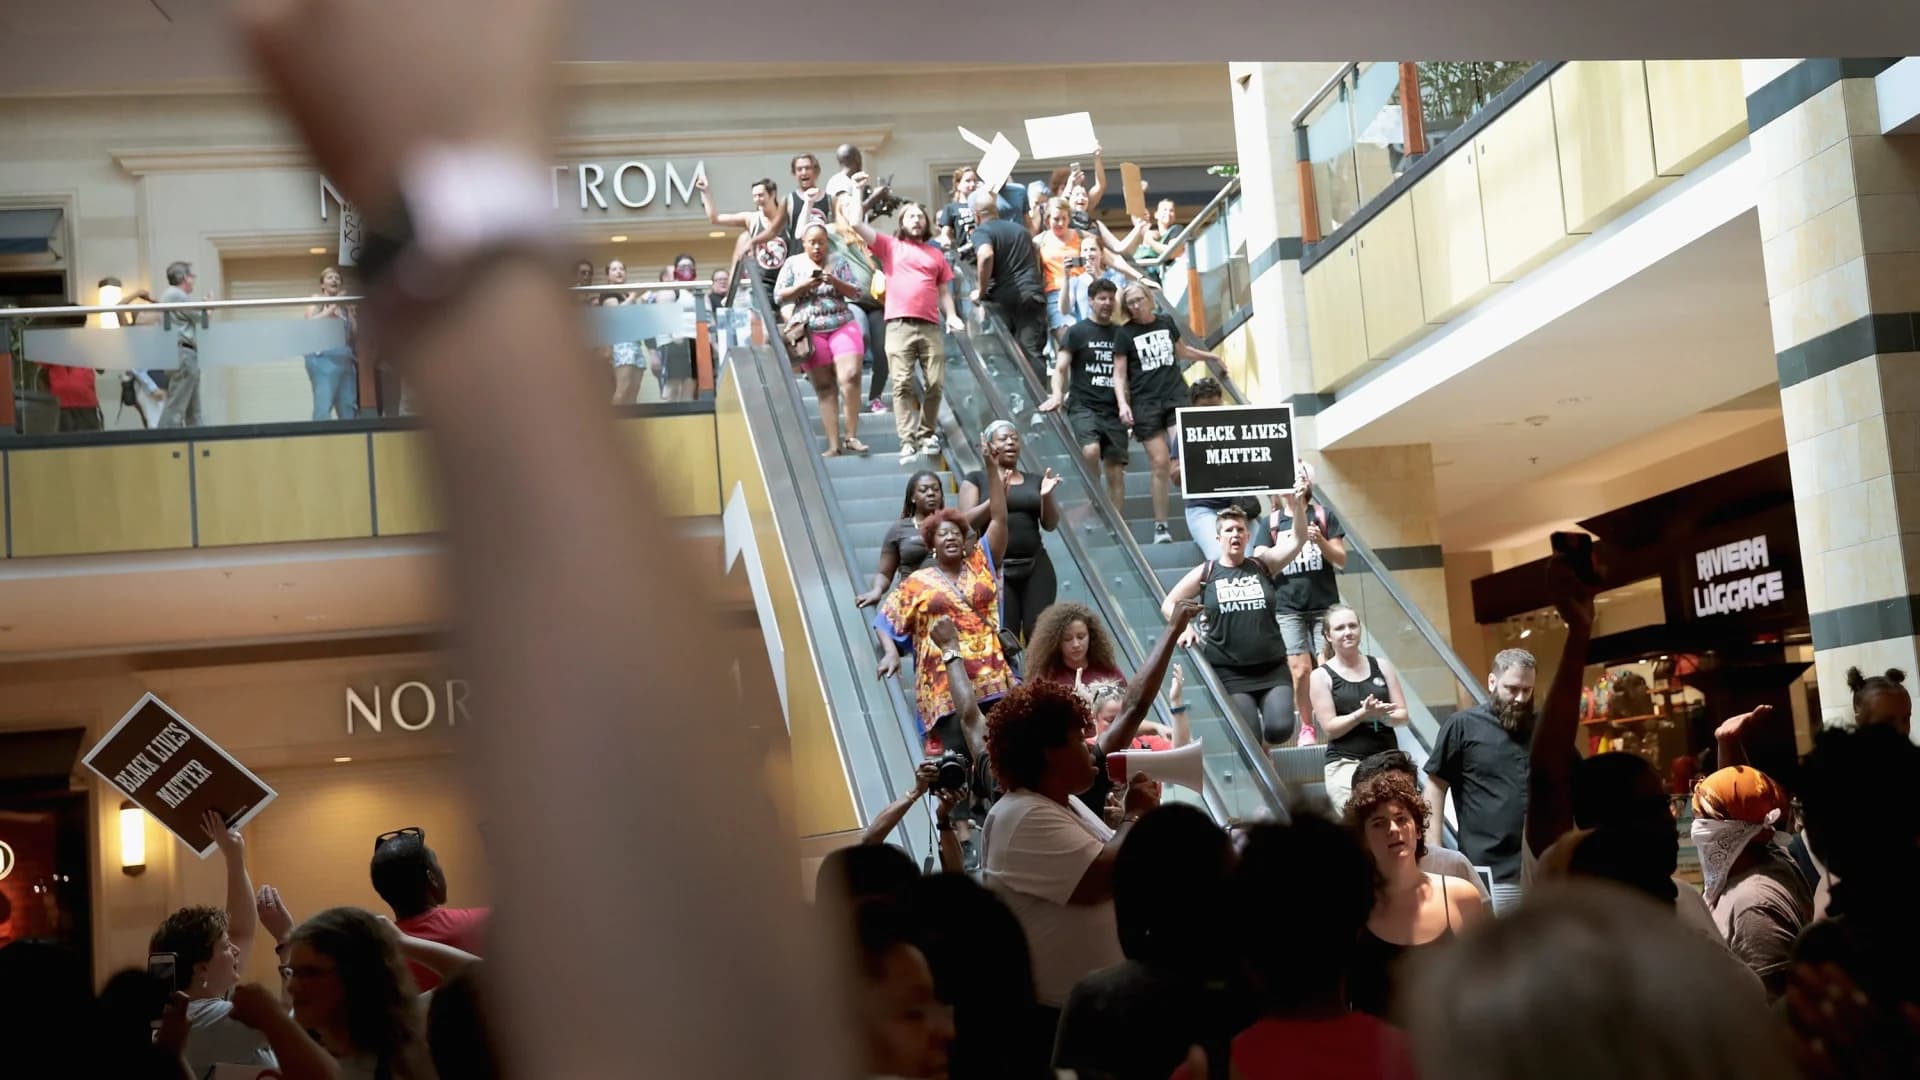 St. Louis protesters go to upscale malls, suburbs